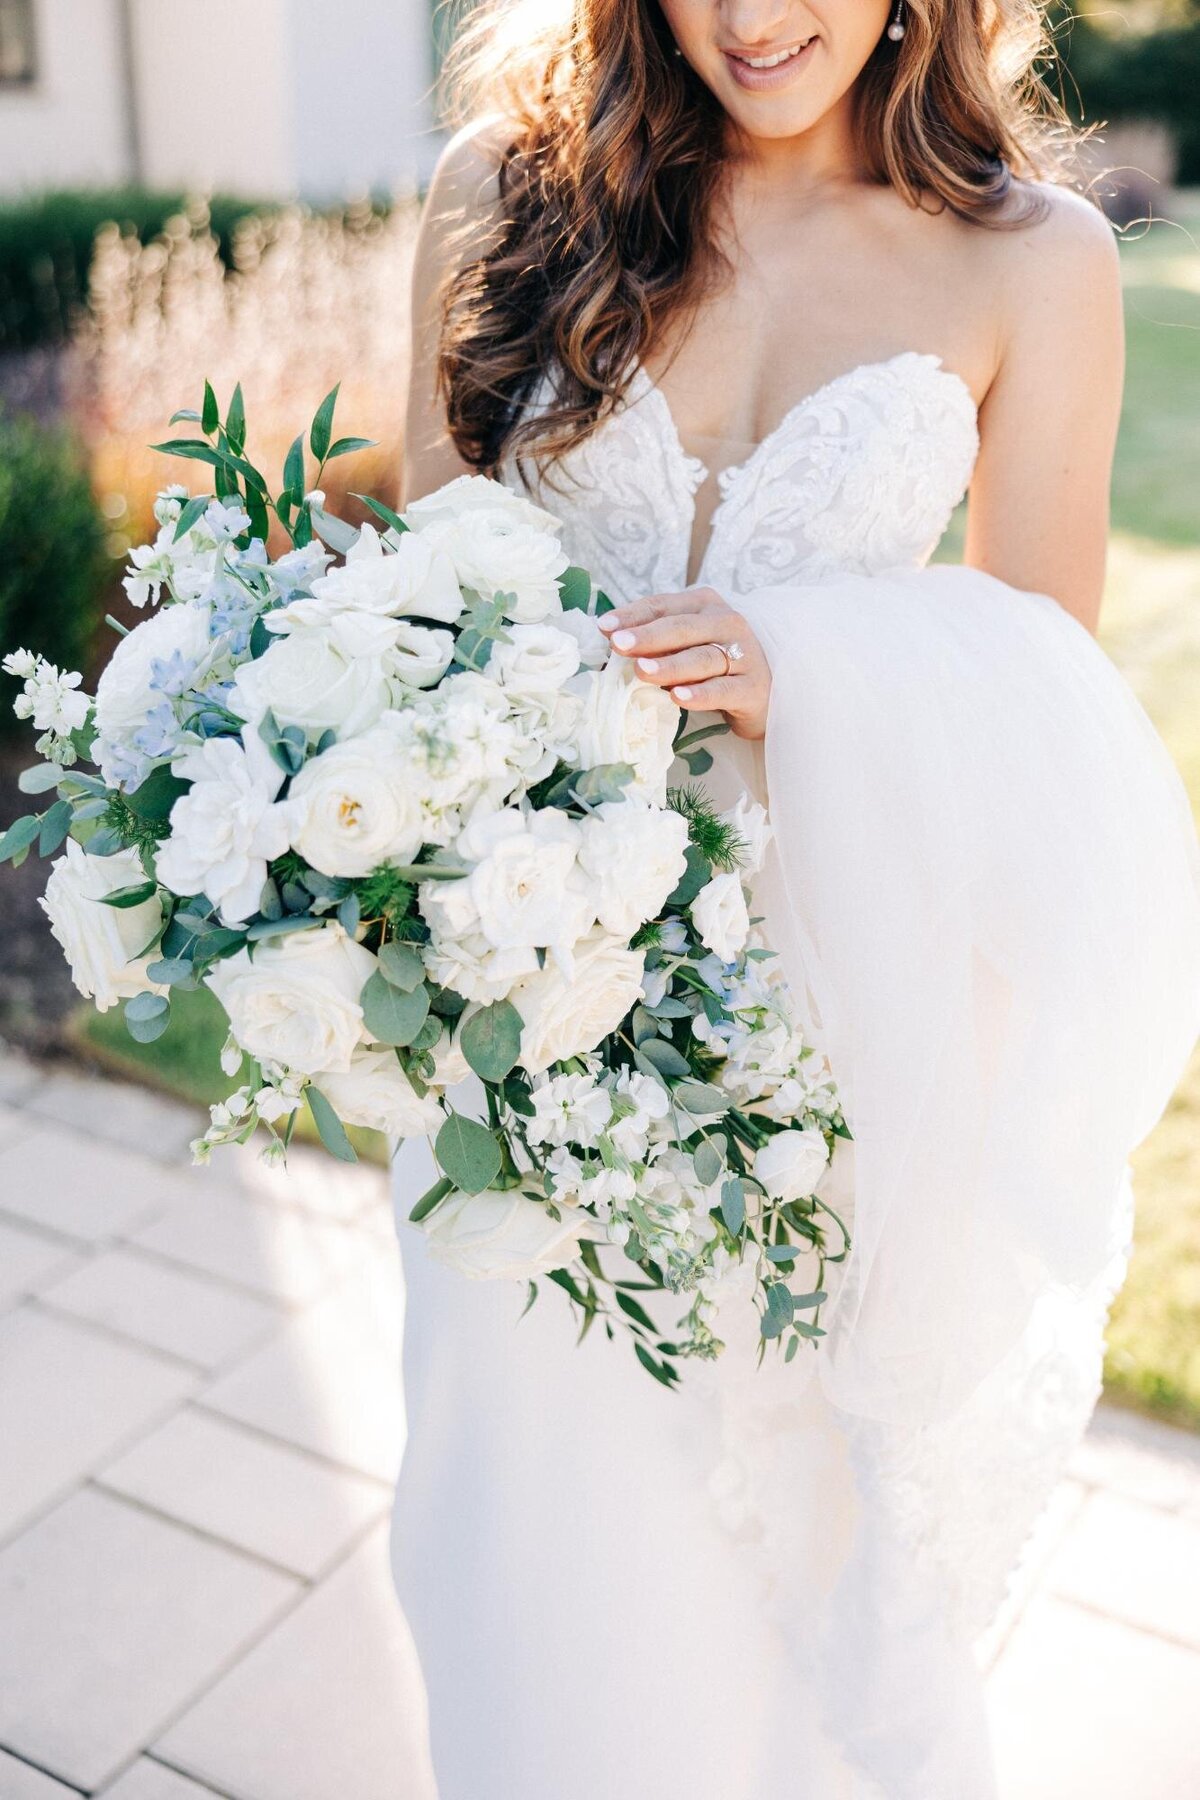 Bride holding a bouquet of white flowers.